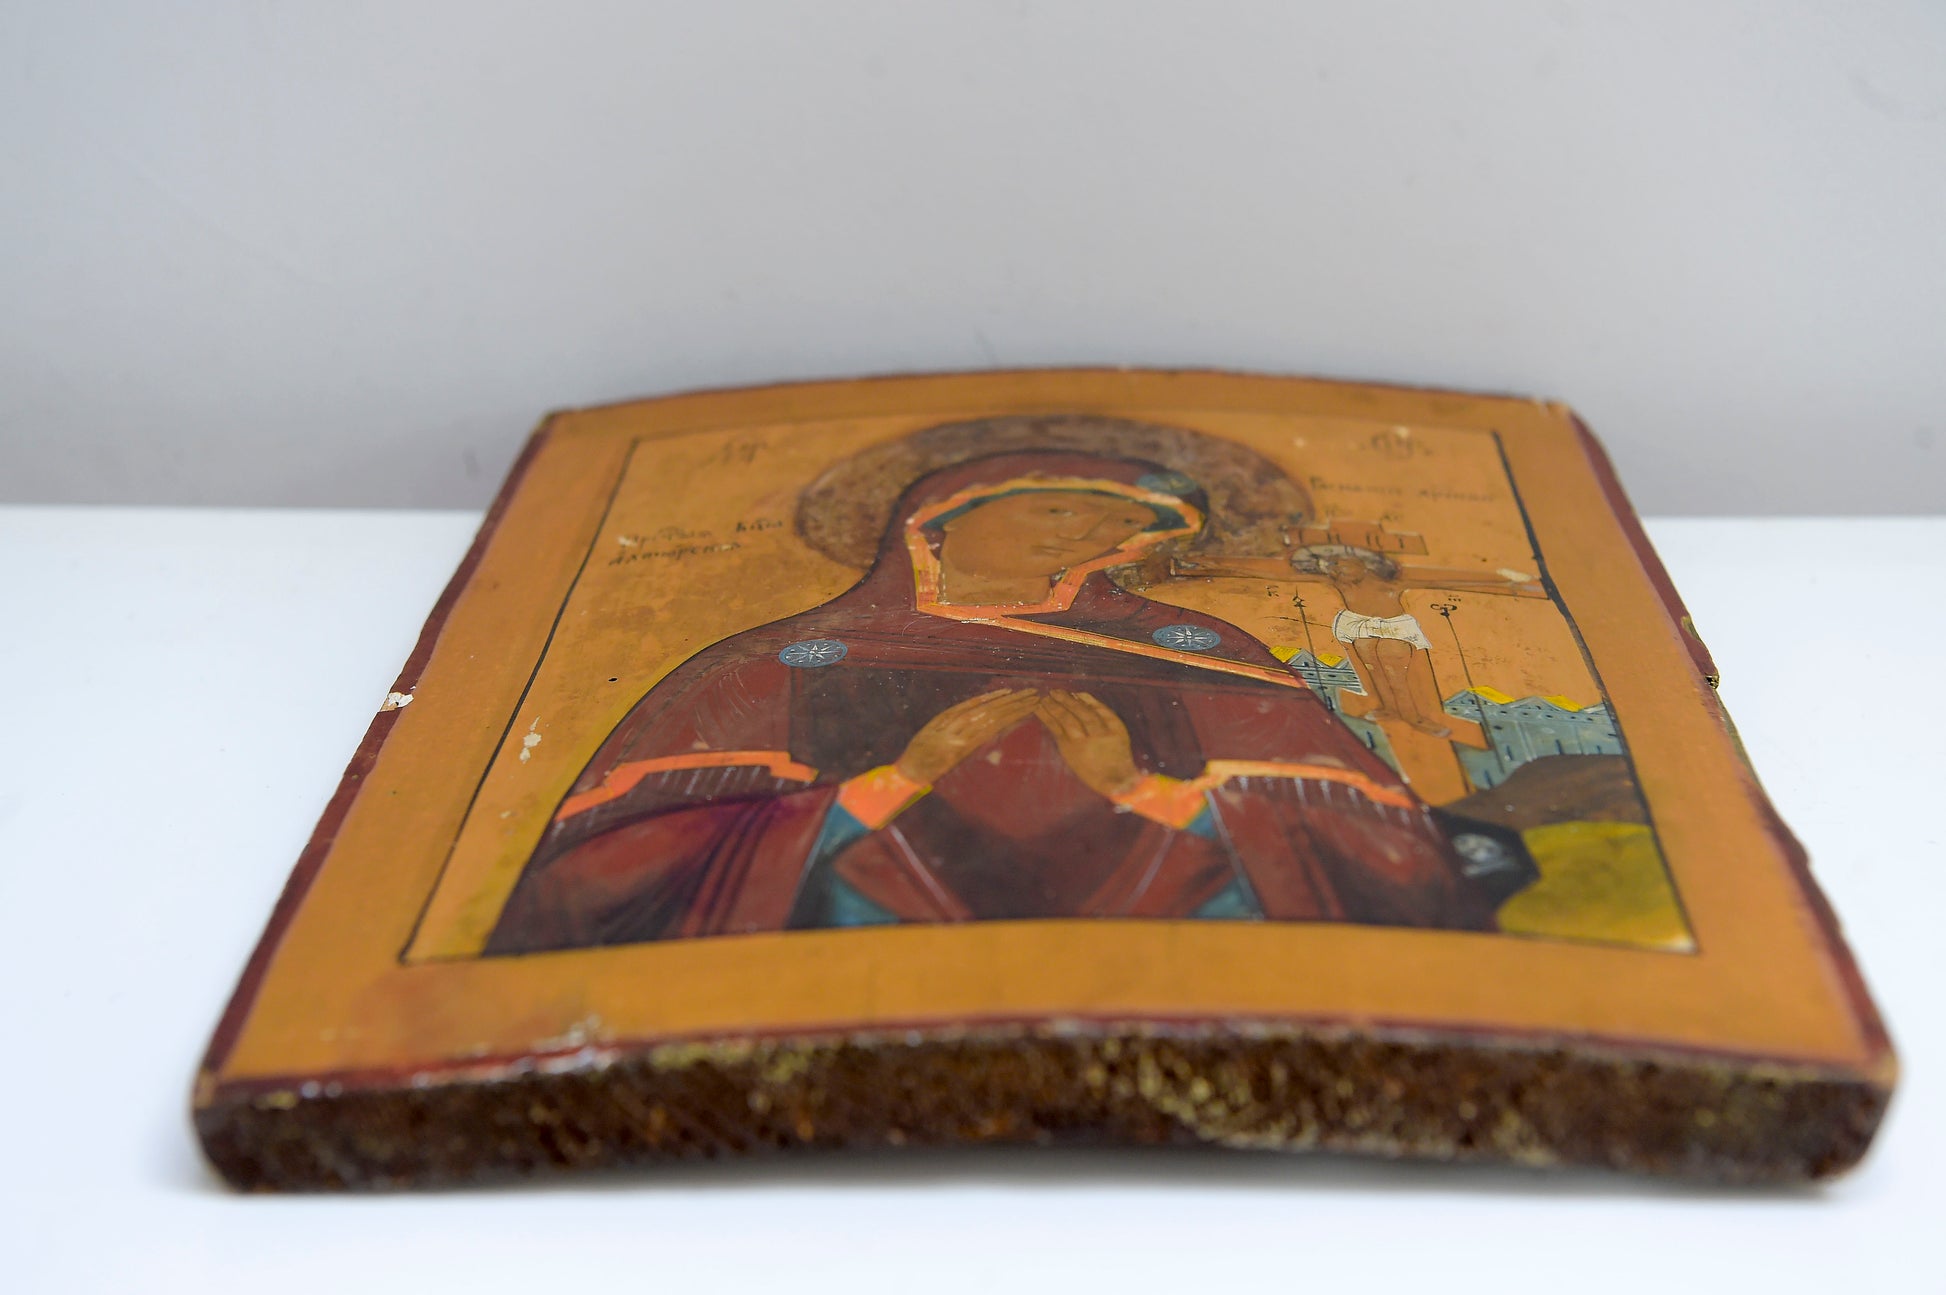 19TH CENTURY Antique Russian Icon on a Curved Wooden Panel. Mother of God and the crucifixion of christ The Wood panel has two reinforcement slats and text to the back.